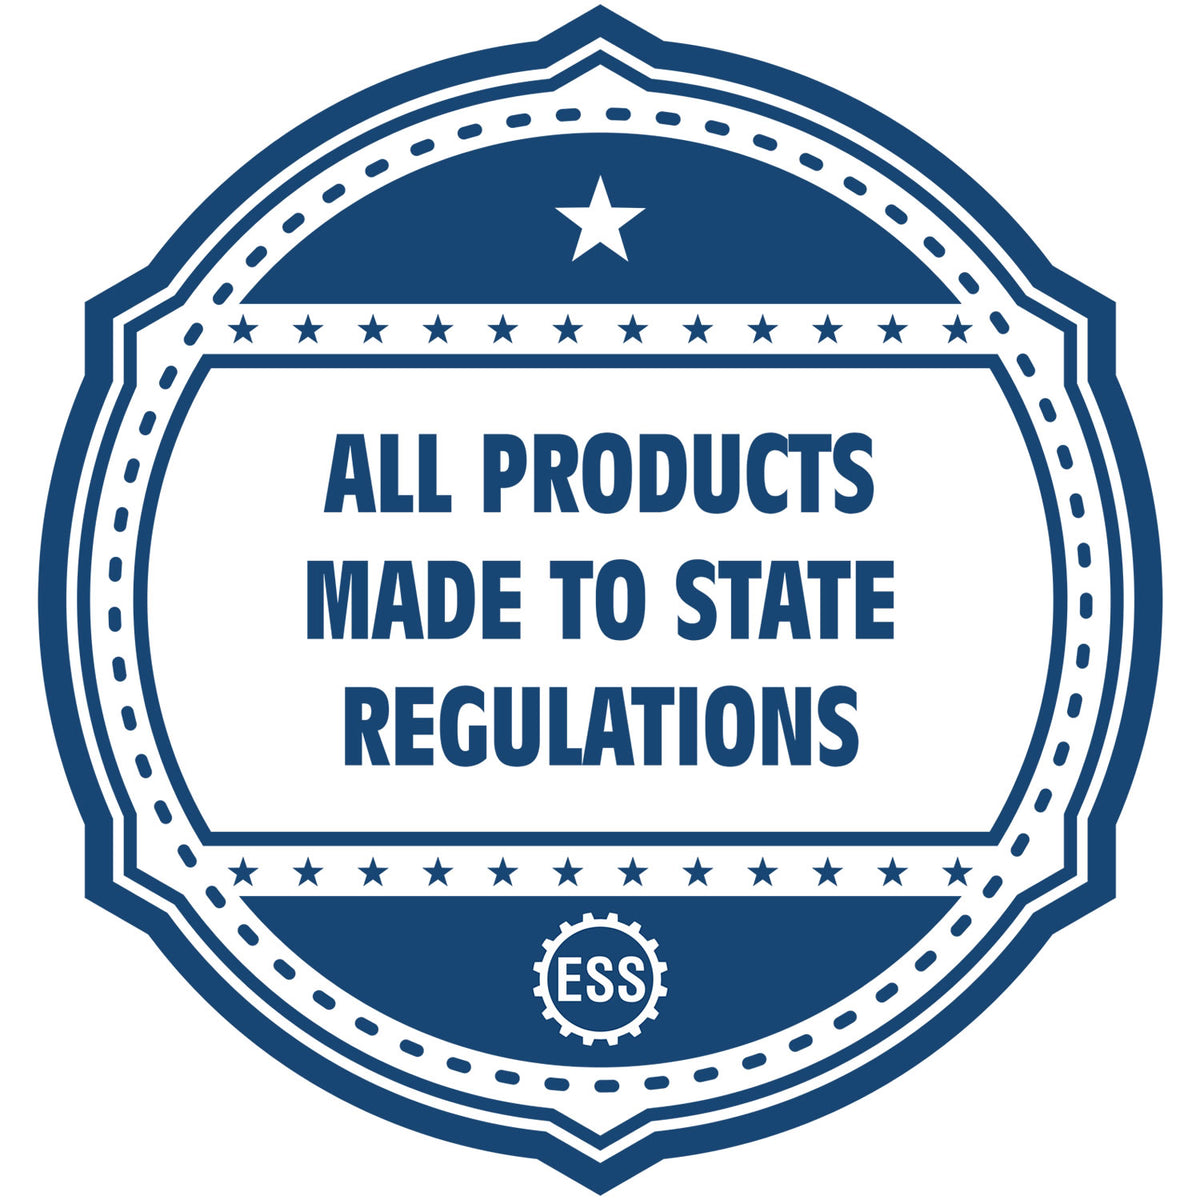 A blue icon or badge for the Hybrid Connecticut Architect Seal showing that this product is made in compliance with state regulations.